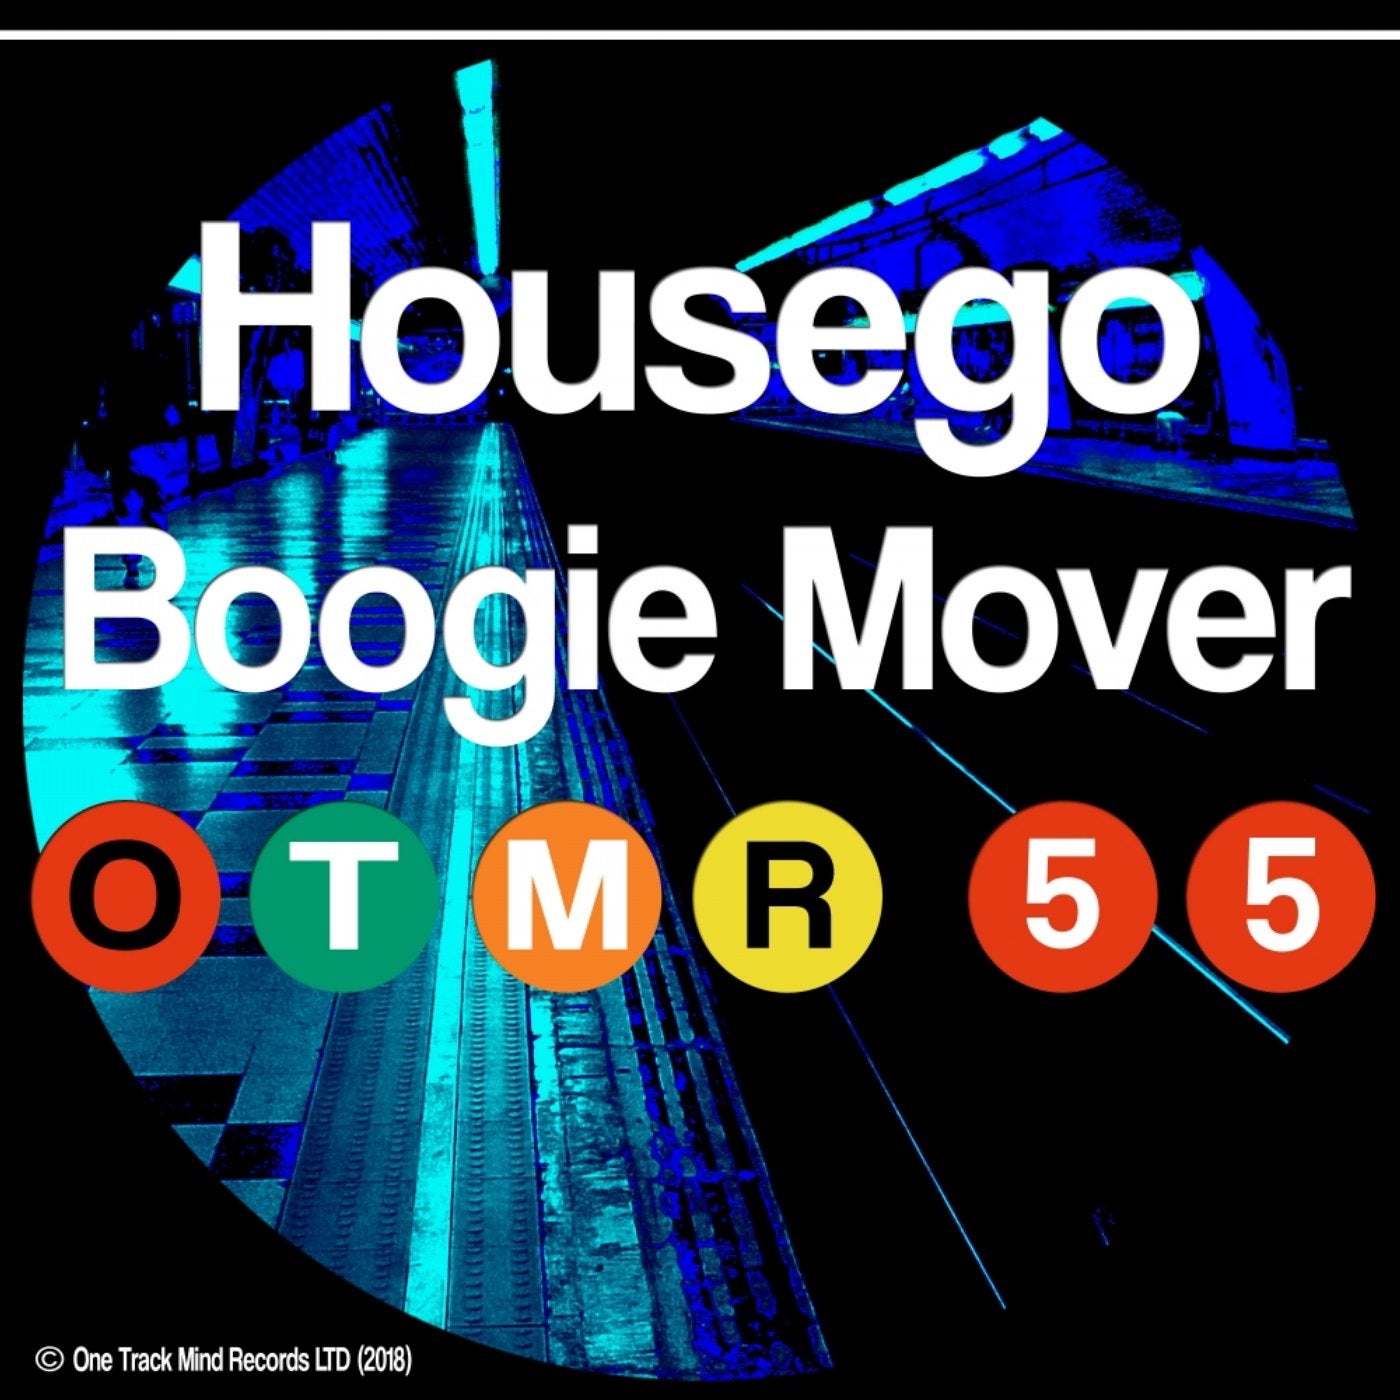 Boogie Mover